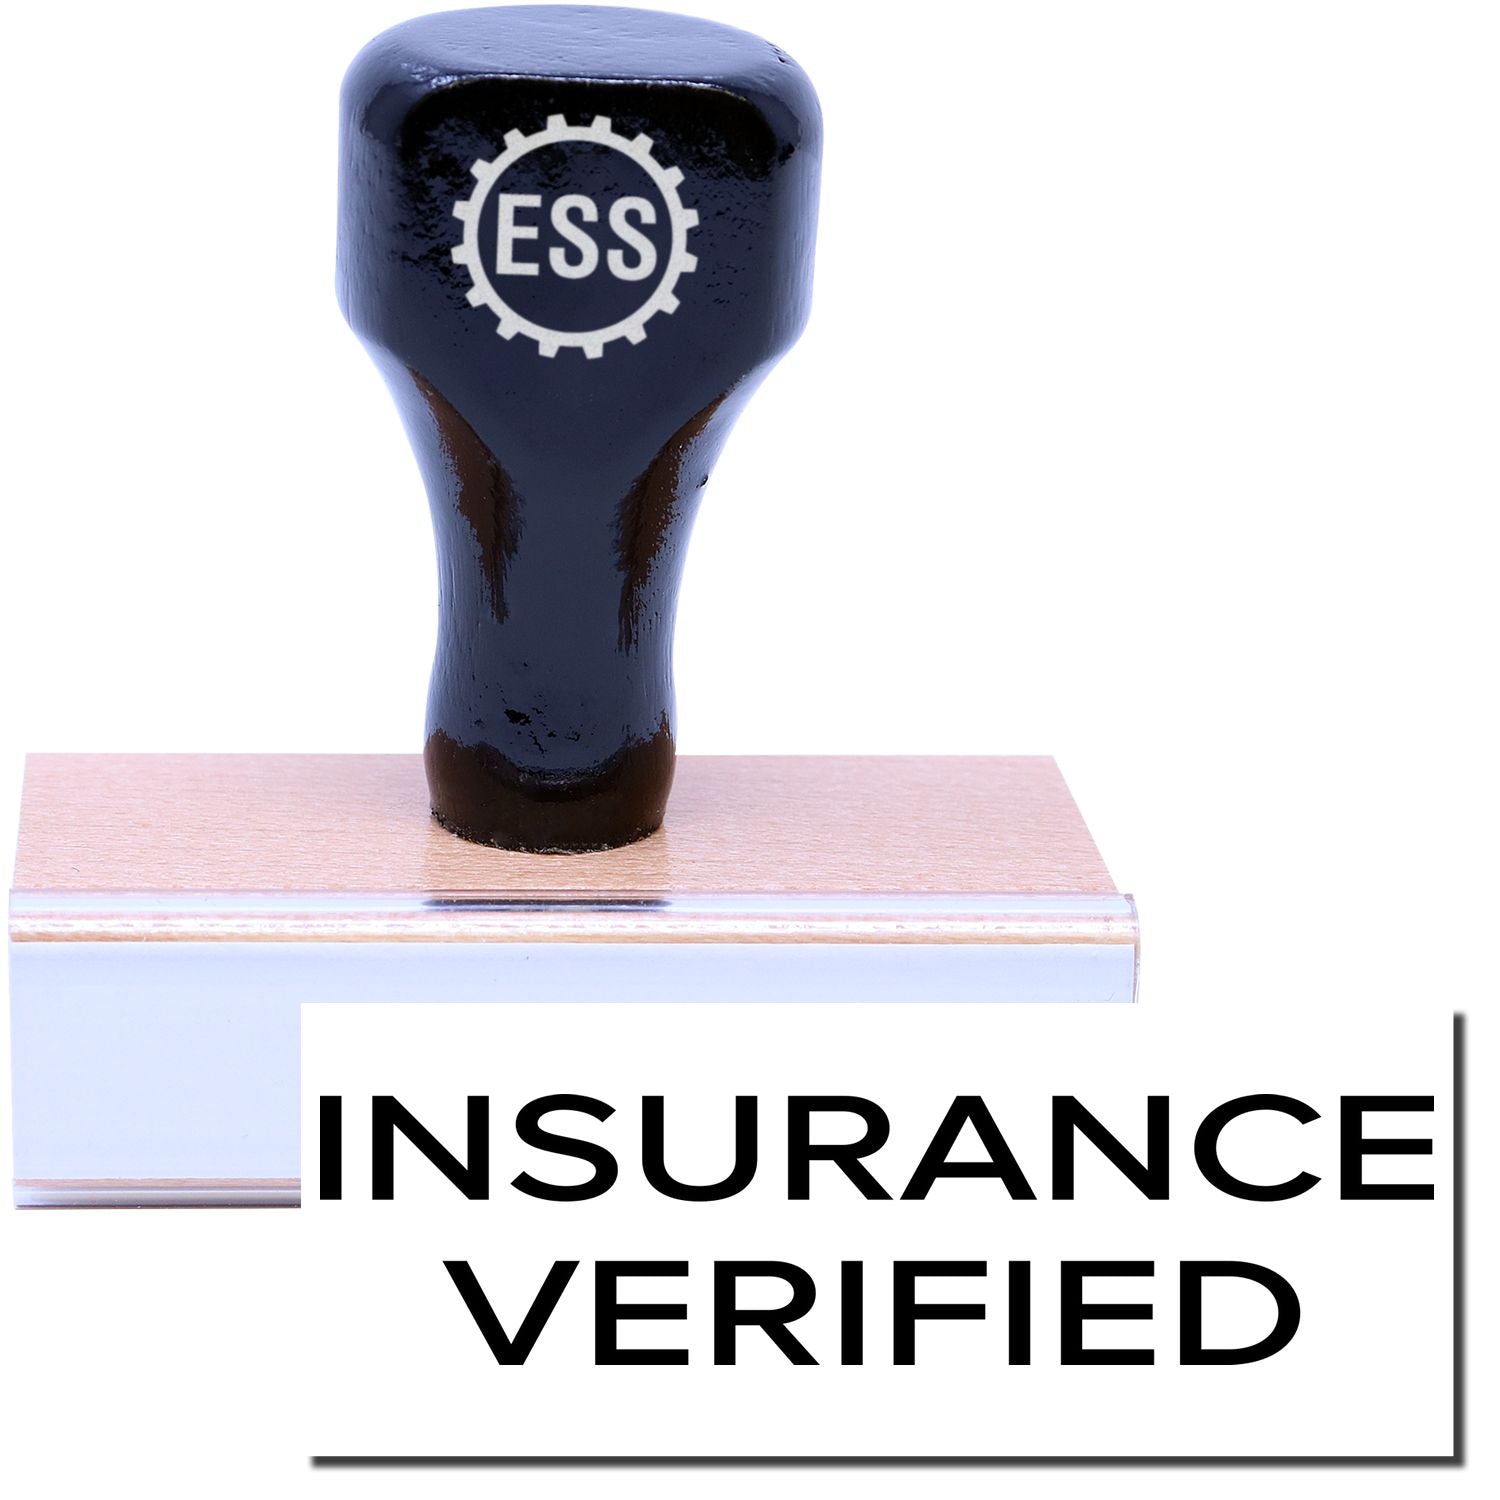 A stock office rubber stamp with a stamped image showing how the text "INSURANCE VERIFIED" in a large narrow font is displayed after stamping.